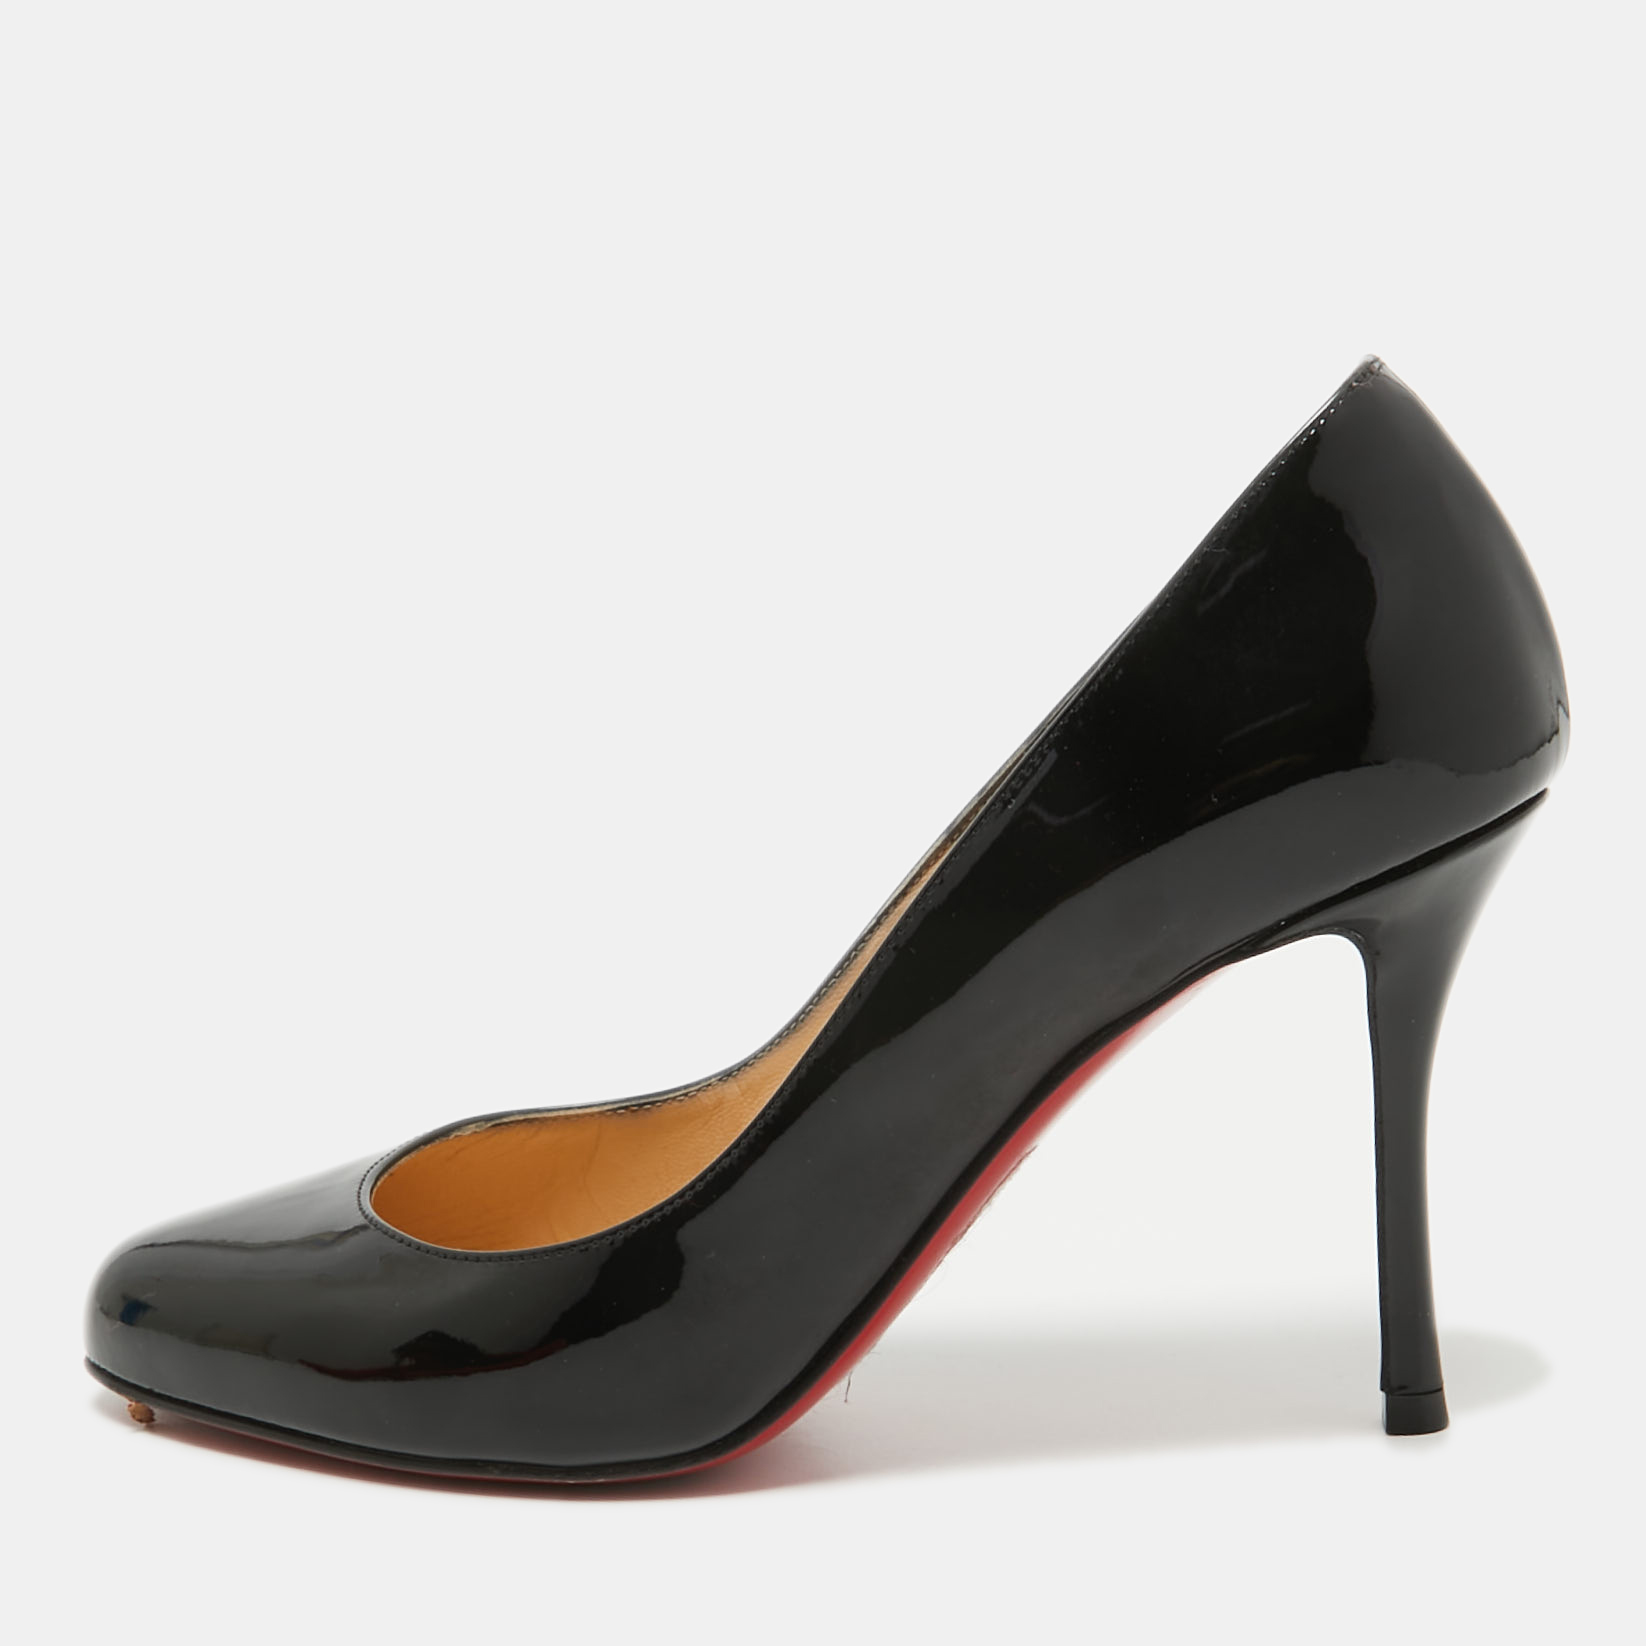 

Christian Louboutin Black Patent Leather Dolly Pumps Size